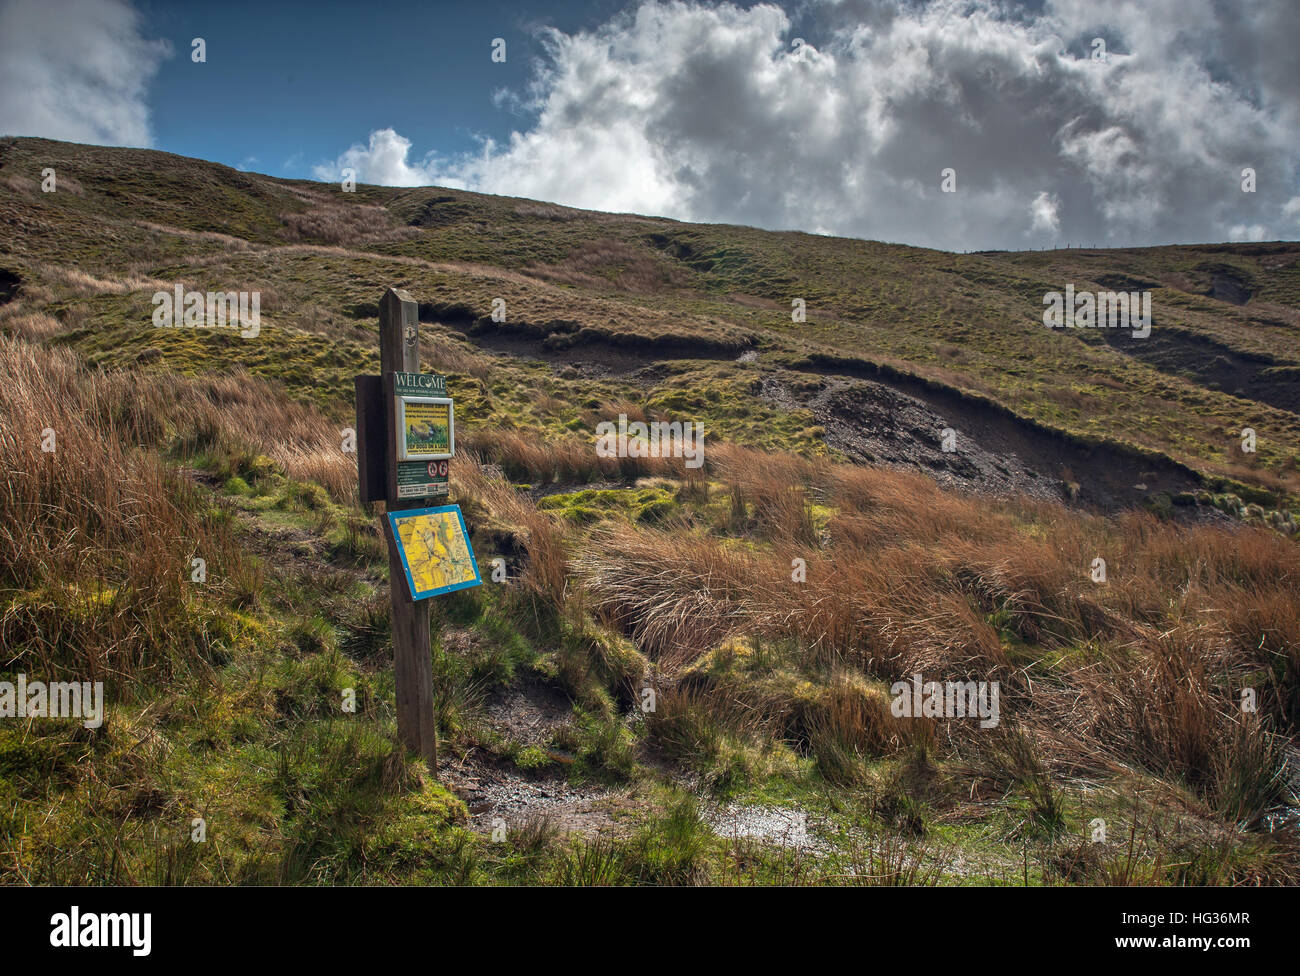 Access notice at Rams Clough in the Trough of Bowland Stock Photo